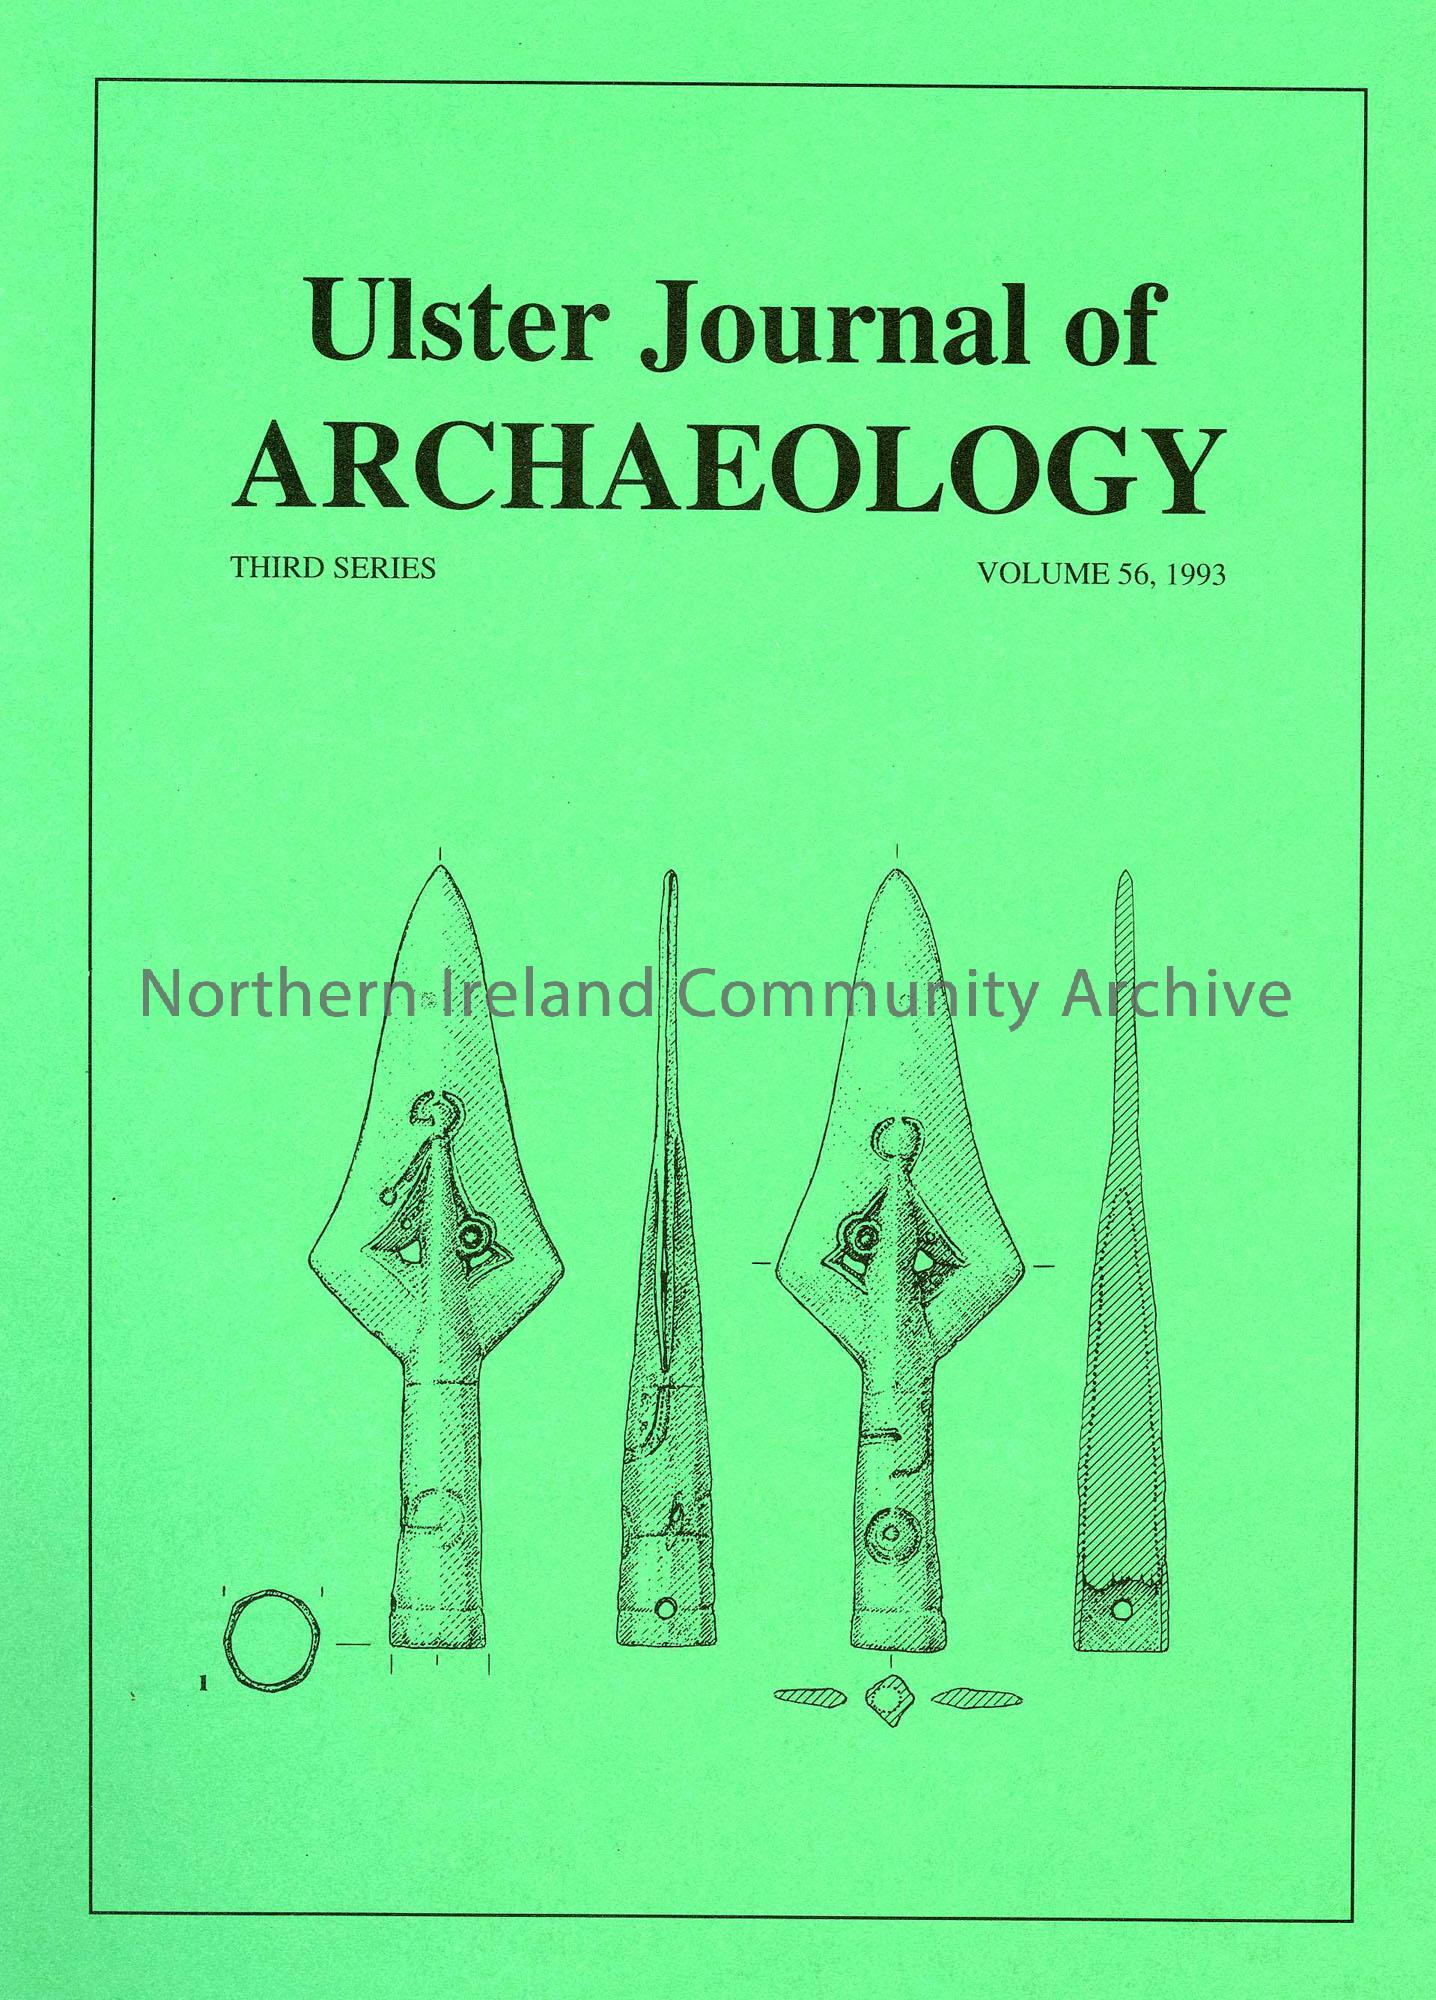 book titled, Ulster Journal of Archaeology. Third Series Volume 56, 1993 (6710)